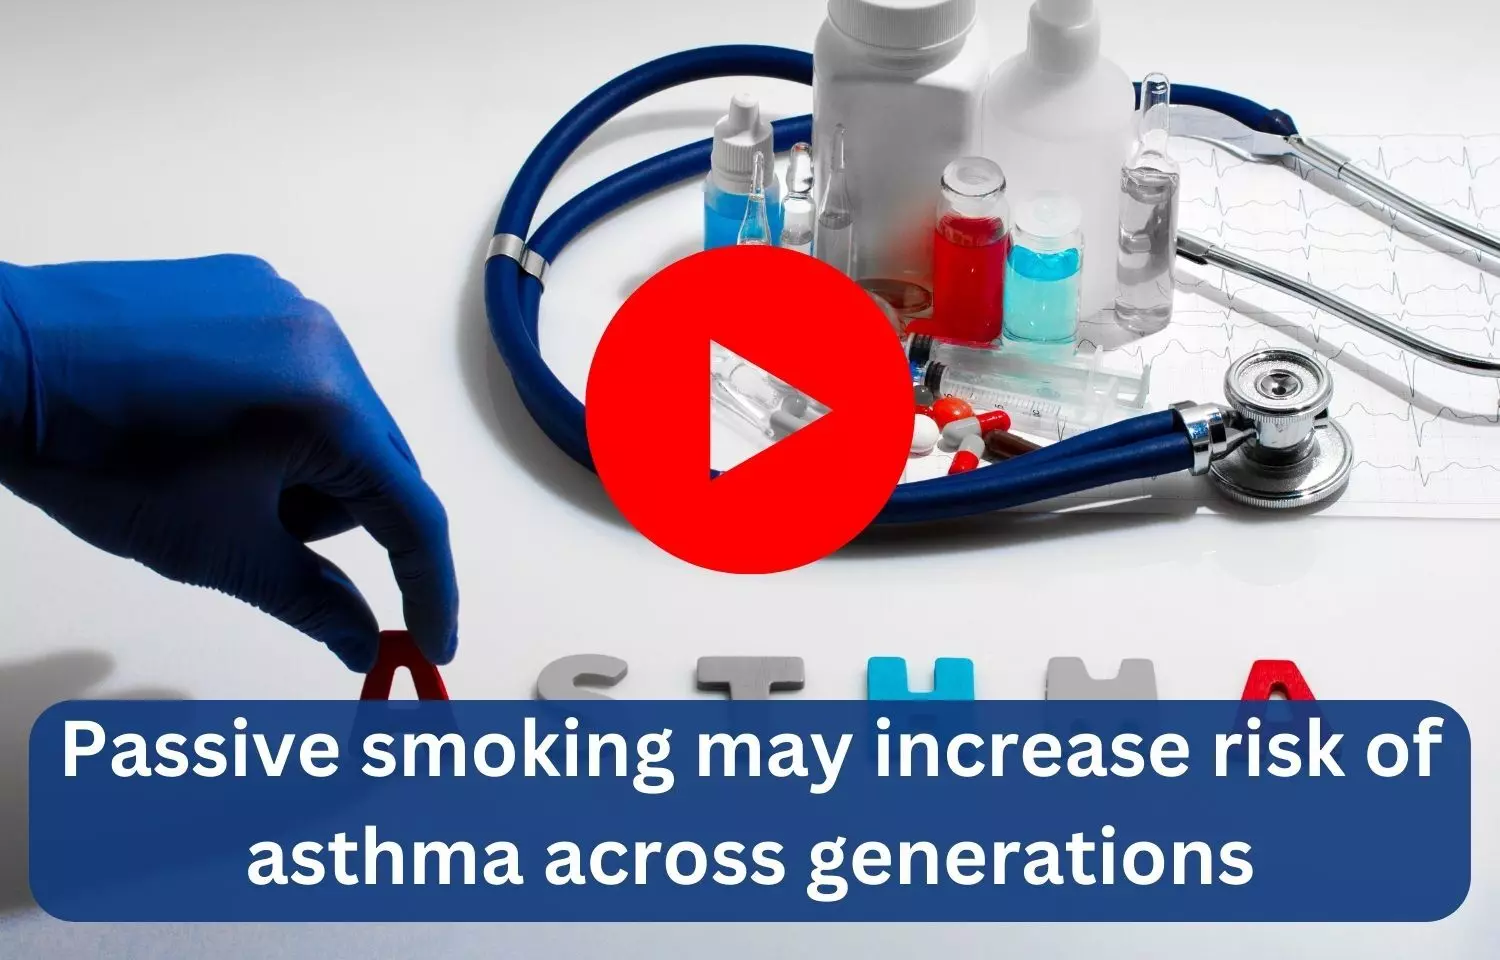 Passive smoking may increase risk of asthma across generations